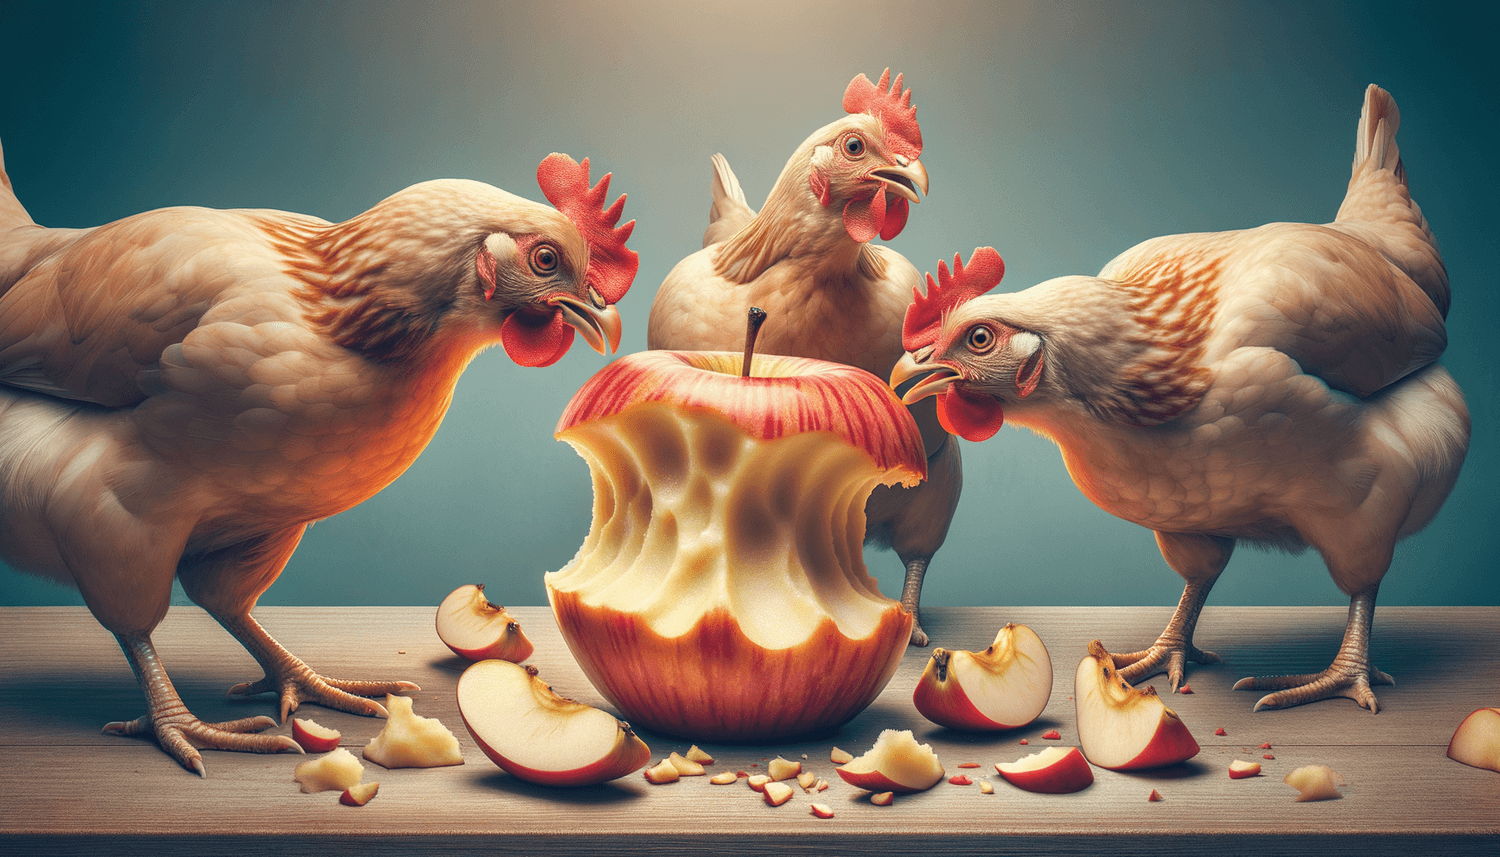 Can Chickens Eat Apple Core?